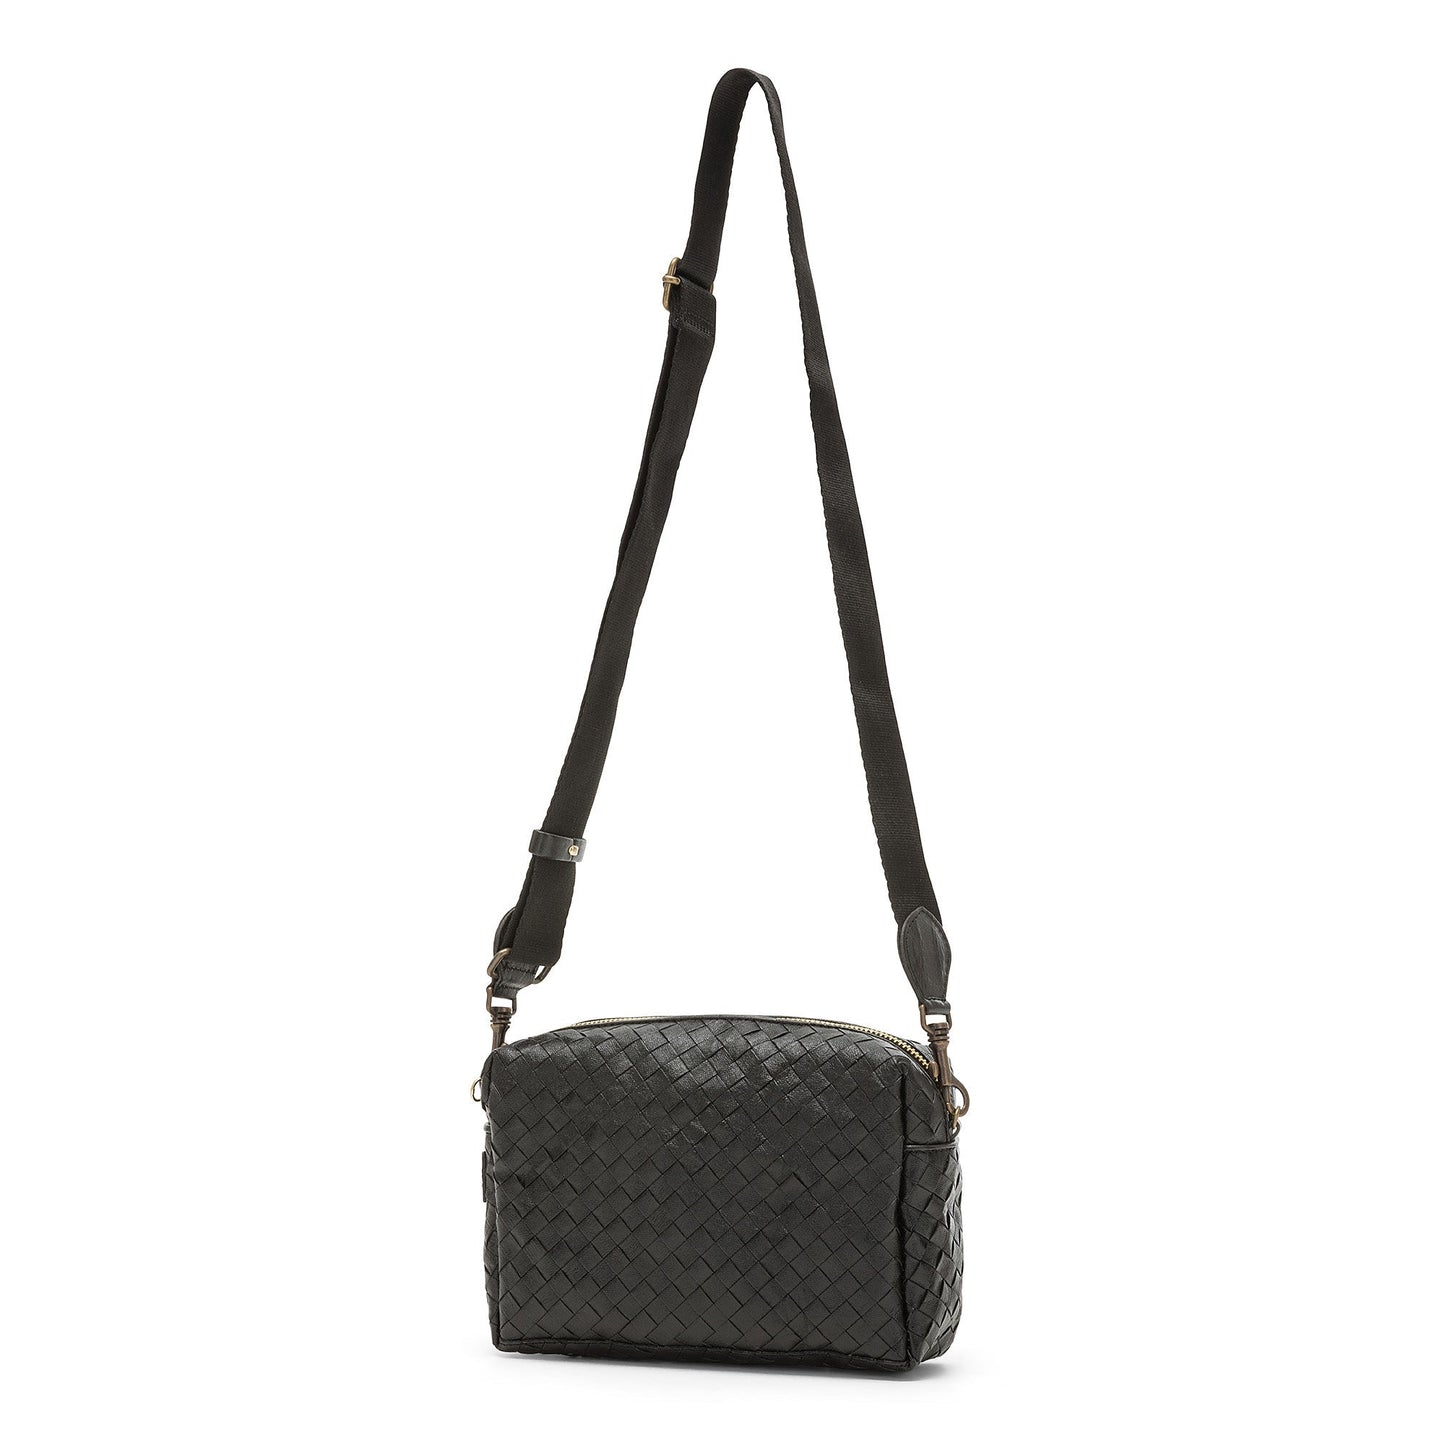 A small woven washable paper handbag is shown. The bag has a wide fabric shoulder strap. The bag and the strap are black.